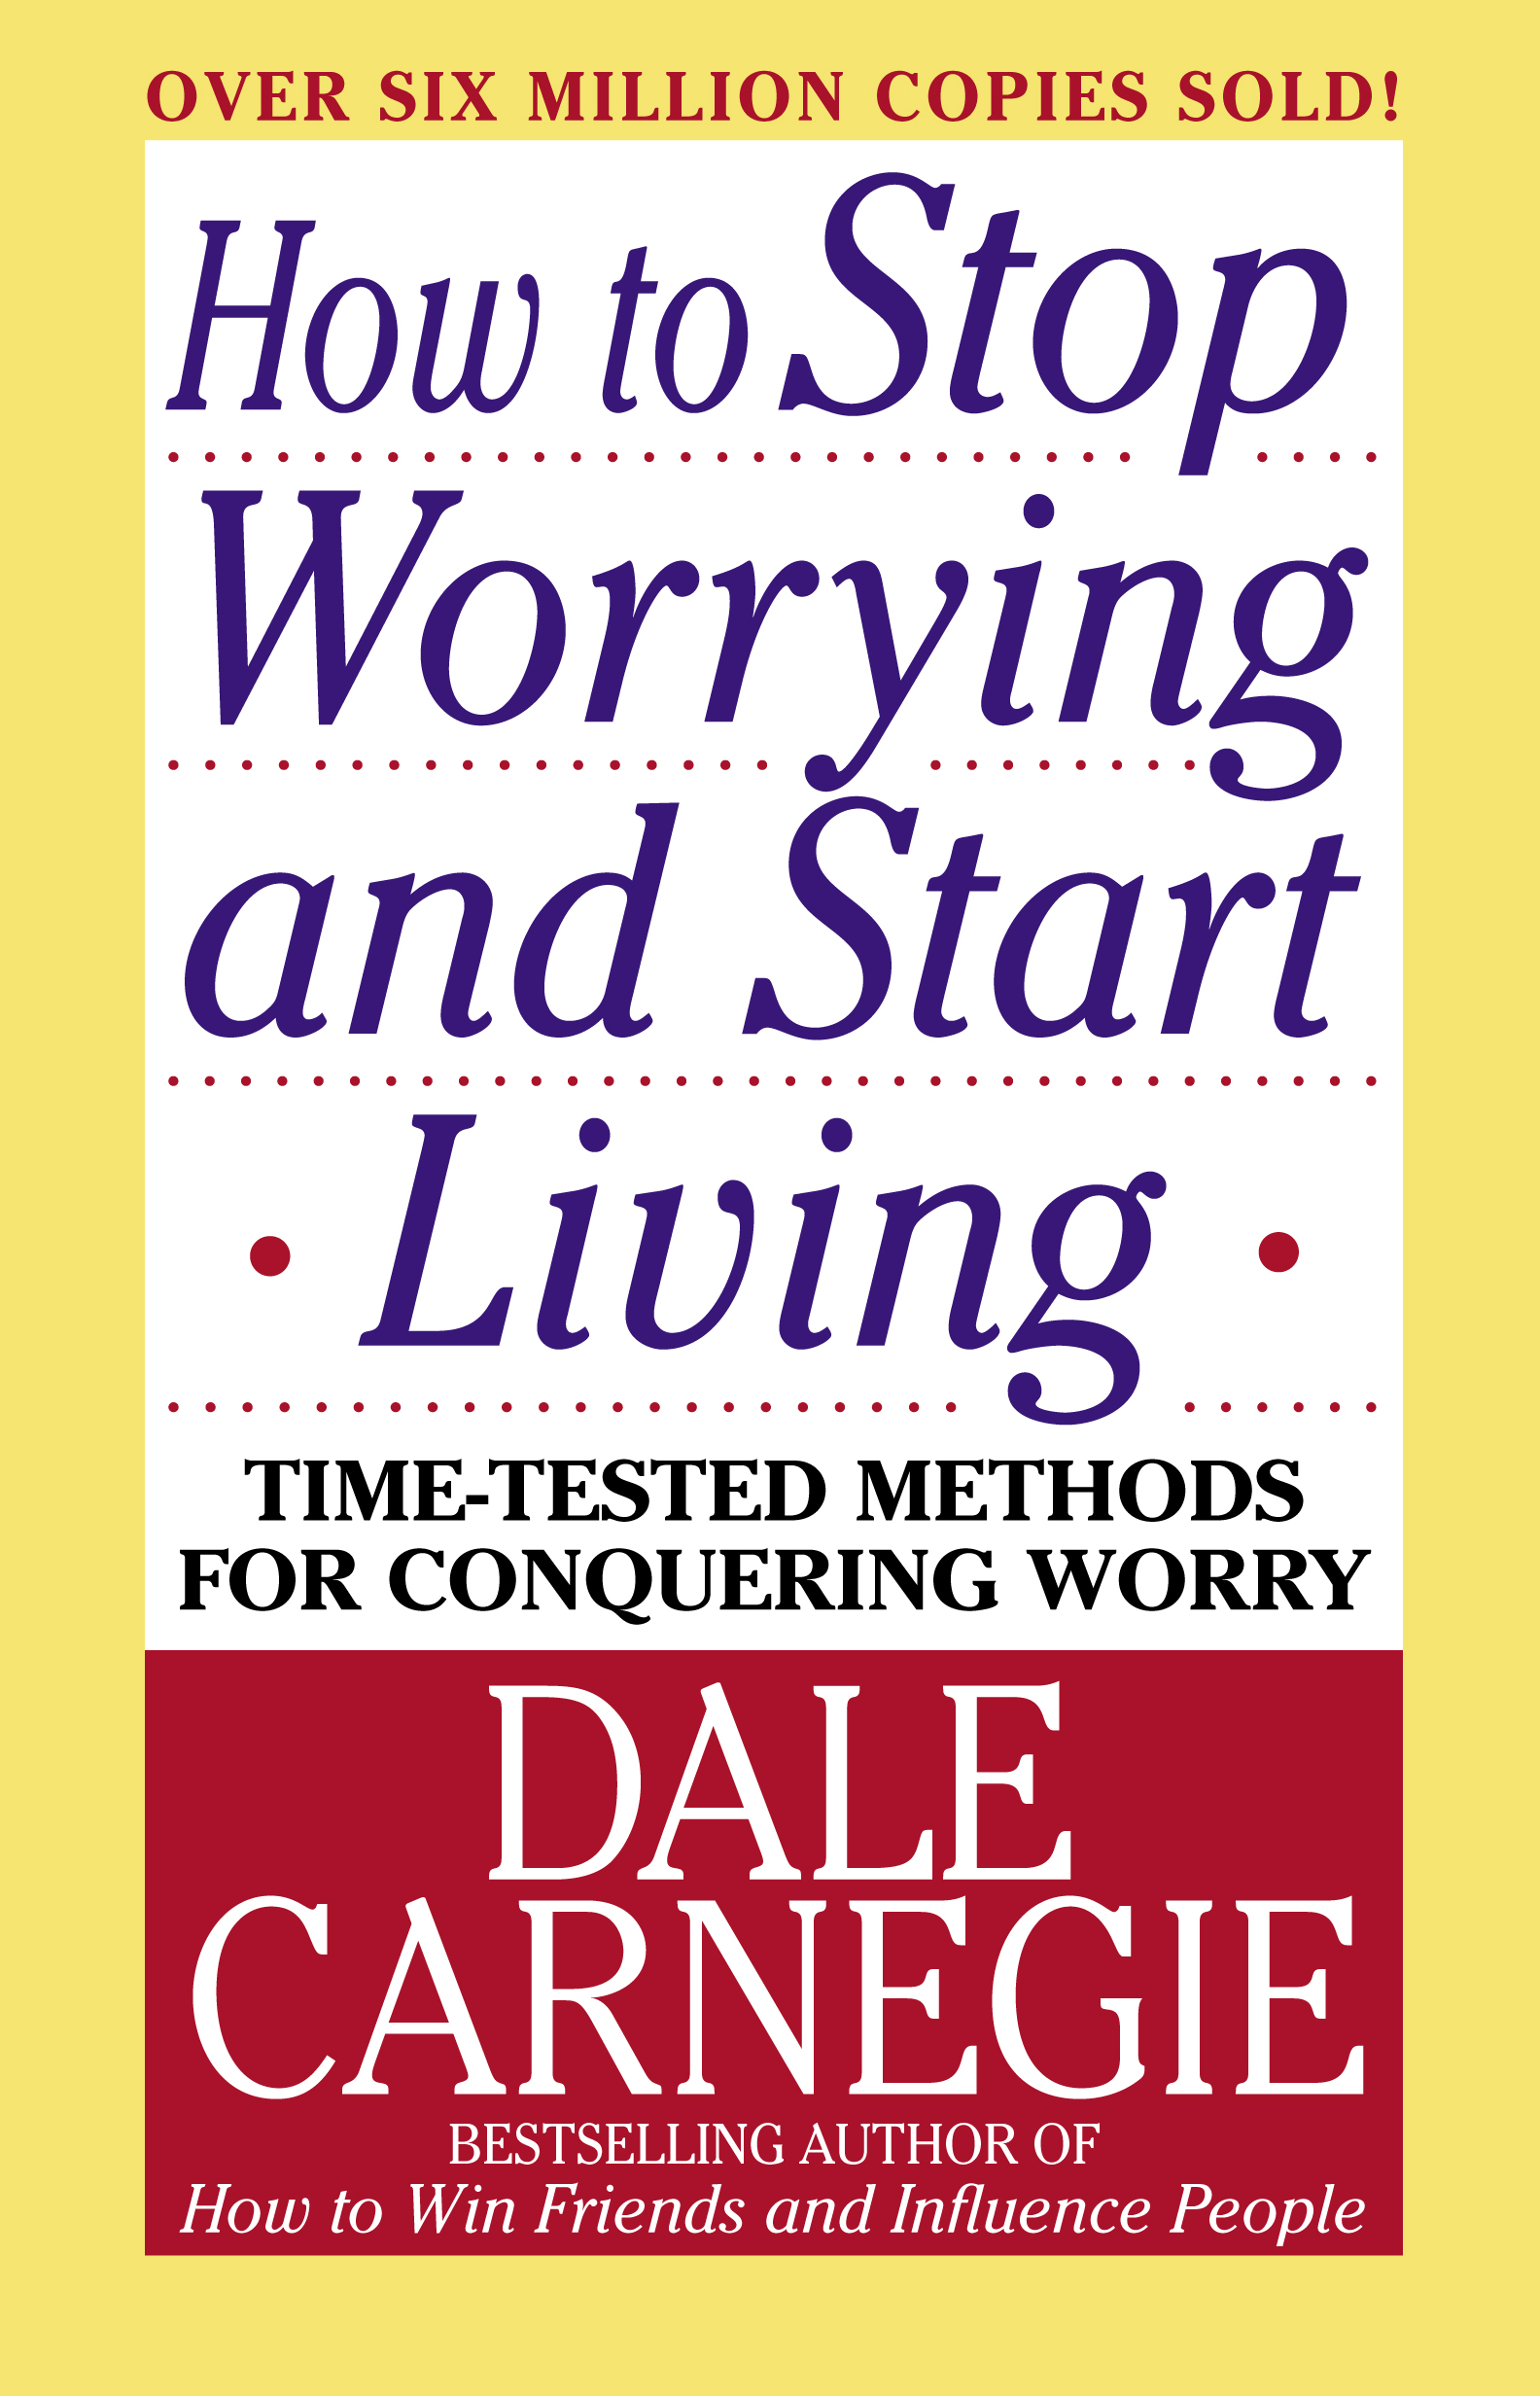 How to Stop Worrying and Start Living(by Dale Carnegie)